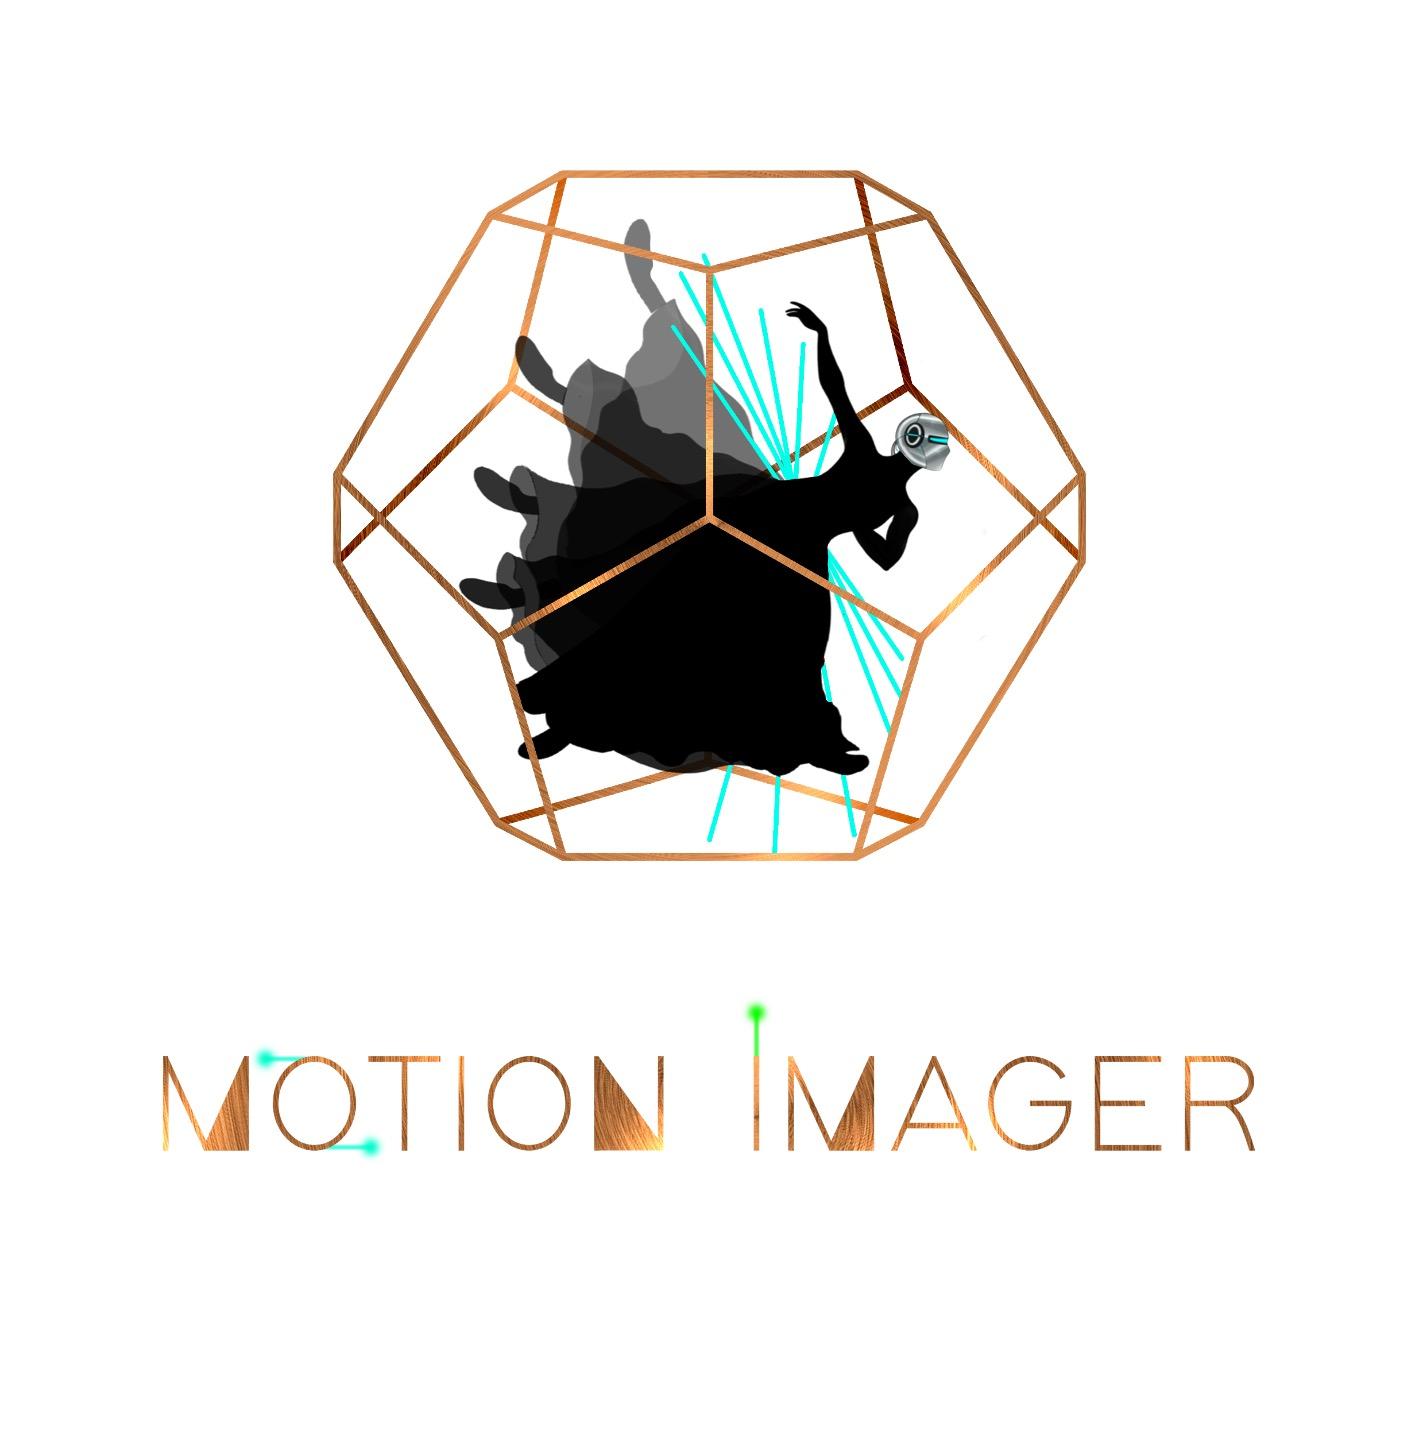 Motion Imager